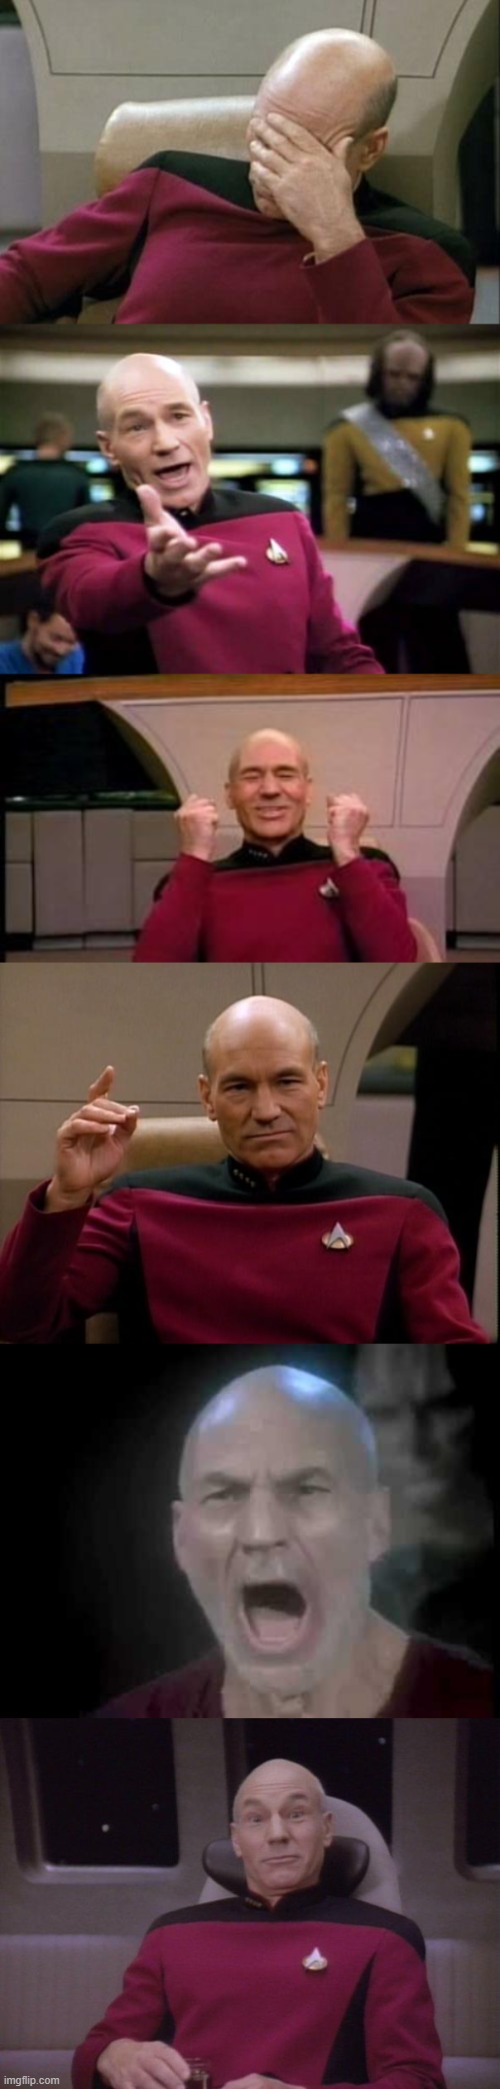 I LOVE THESE TEMPLATES LMFAO IM GONNA TRY USING THEM MORE OFTEEEEEN POOPY | image tagged in memes,captain picard facepalm,picard wtf,happy picard,picard make it so,picard four lights | made w/ Imgflip meme maker